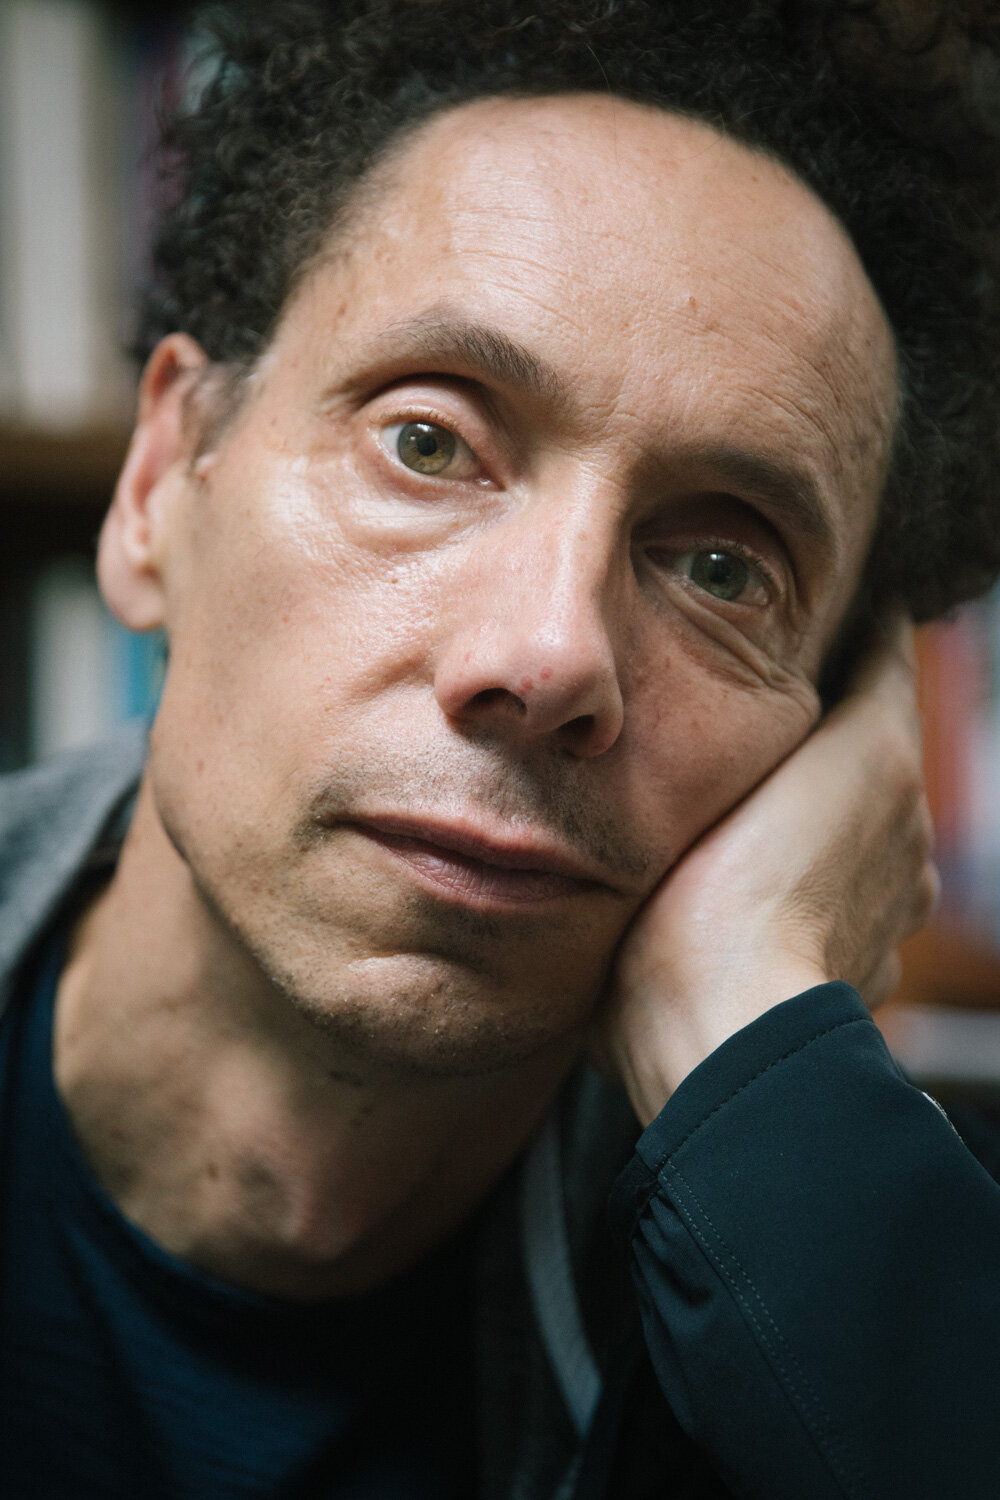  NEW YORK CITY 2019 08 28 Malcolm Gladwell, award-winning writer and journalist. Shot on assignment in Greenwich Village, New York for Dagens Nyheter. 